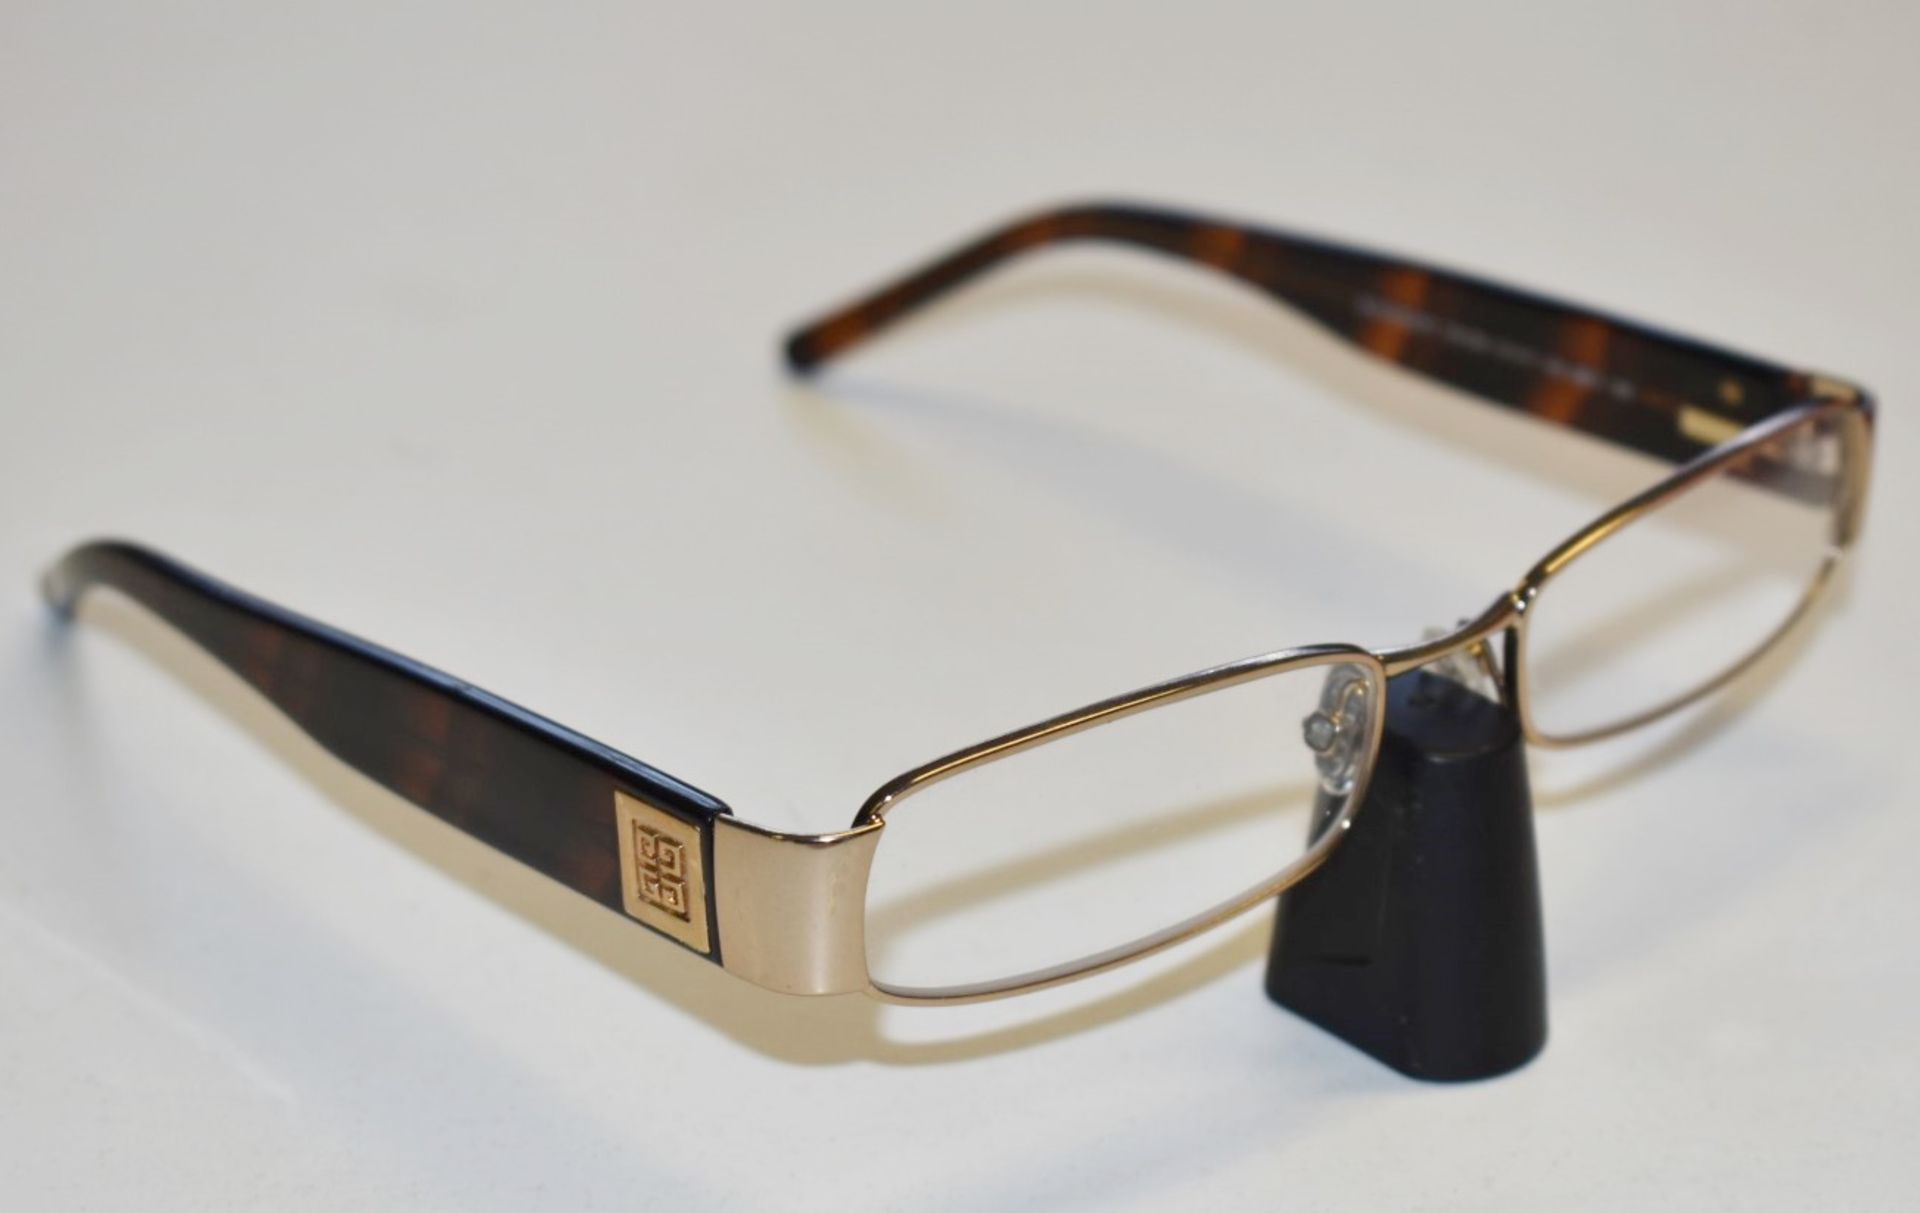 1 x Genuine GIVENCHY Spectacle Eye Glasses Frame - Ex Display Stock - Ref: GTI174 - CL645 -